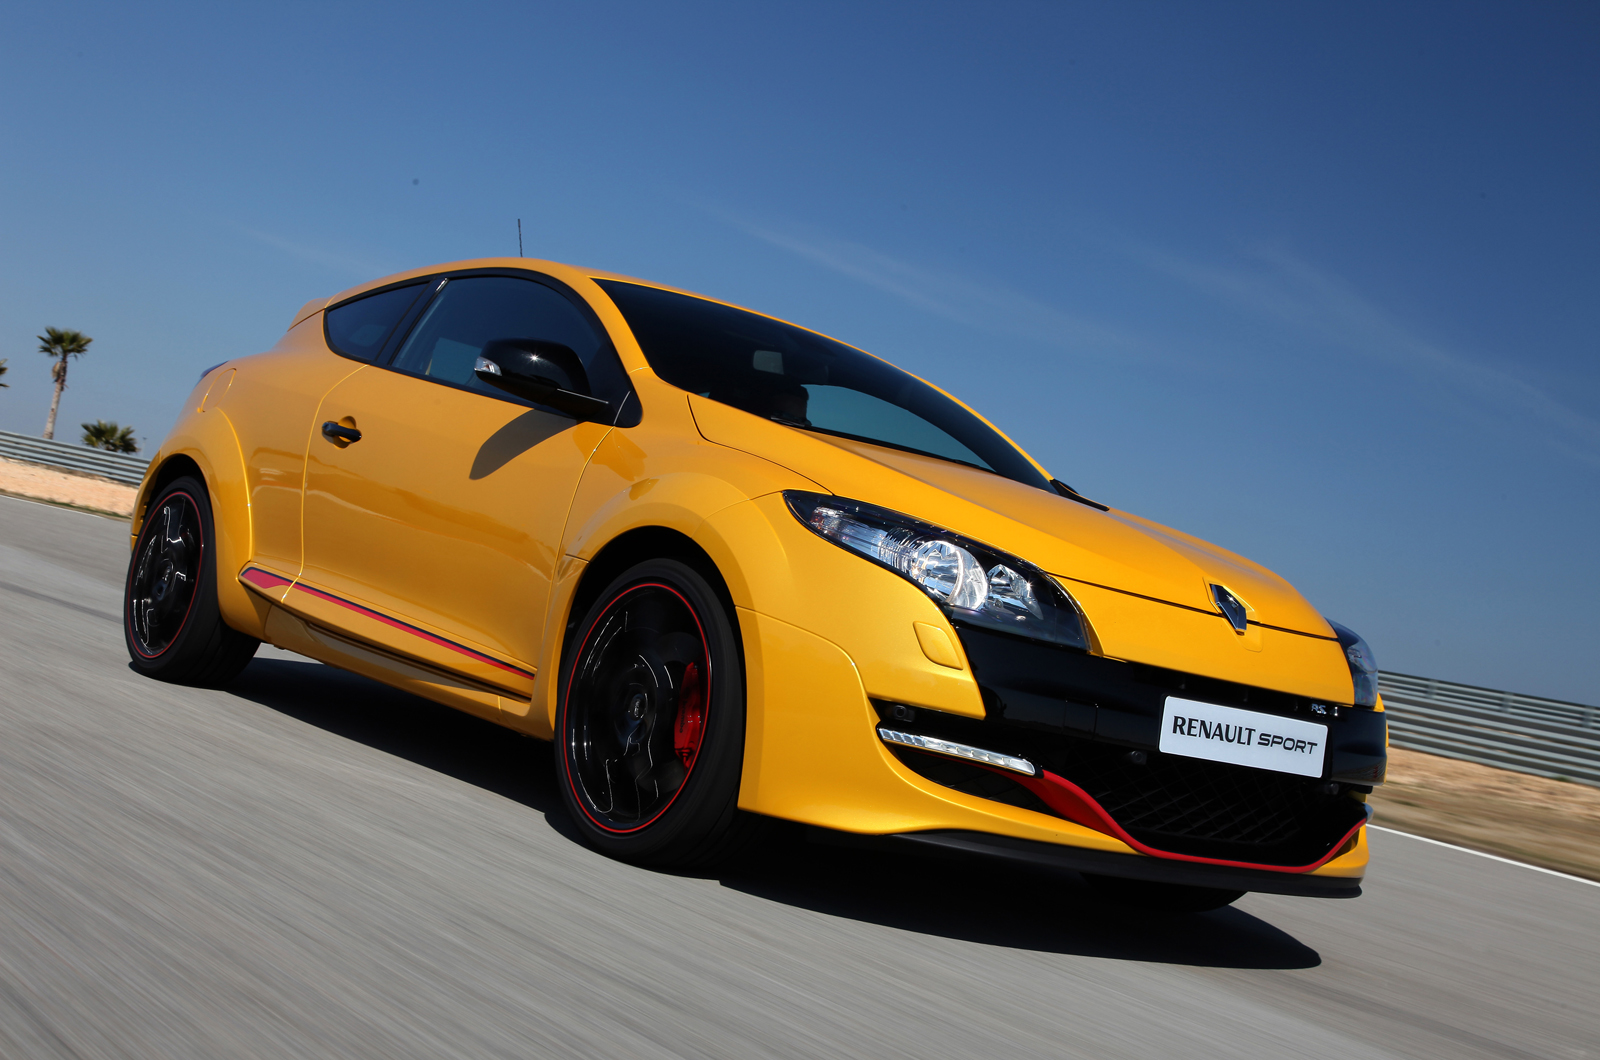 Renault Megane 3 RS 265 - Race cars for sale 